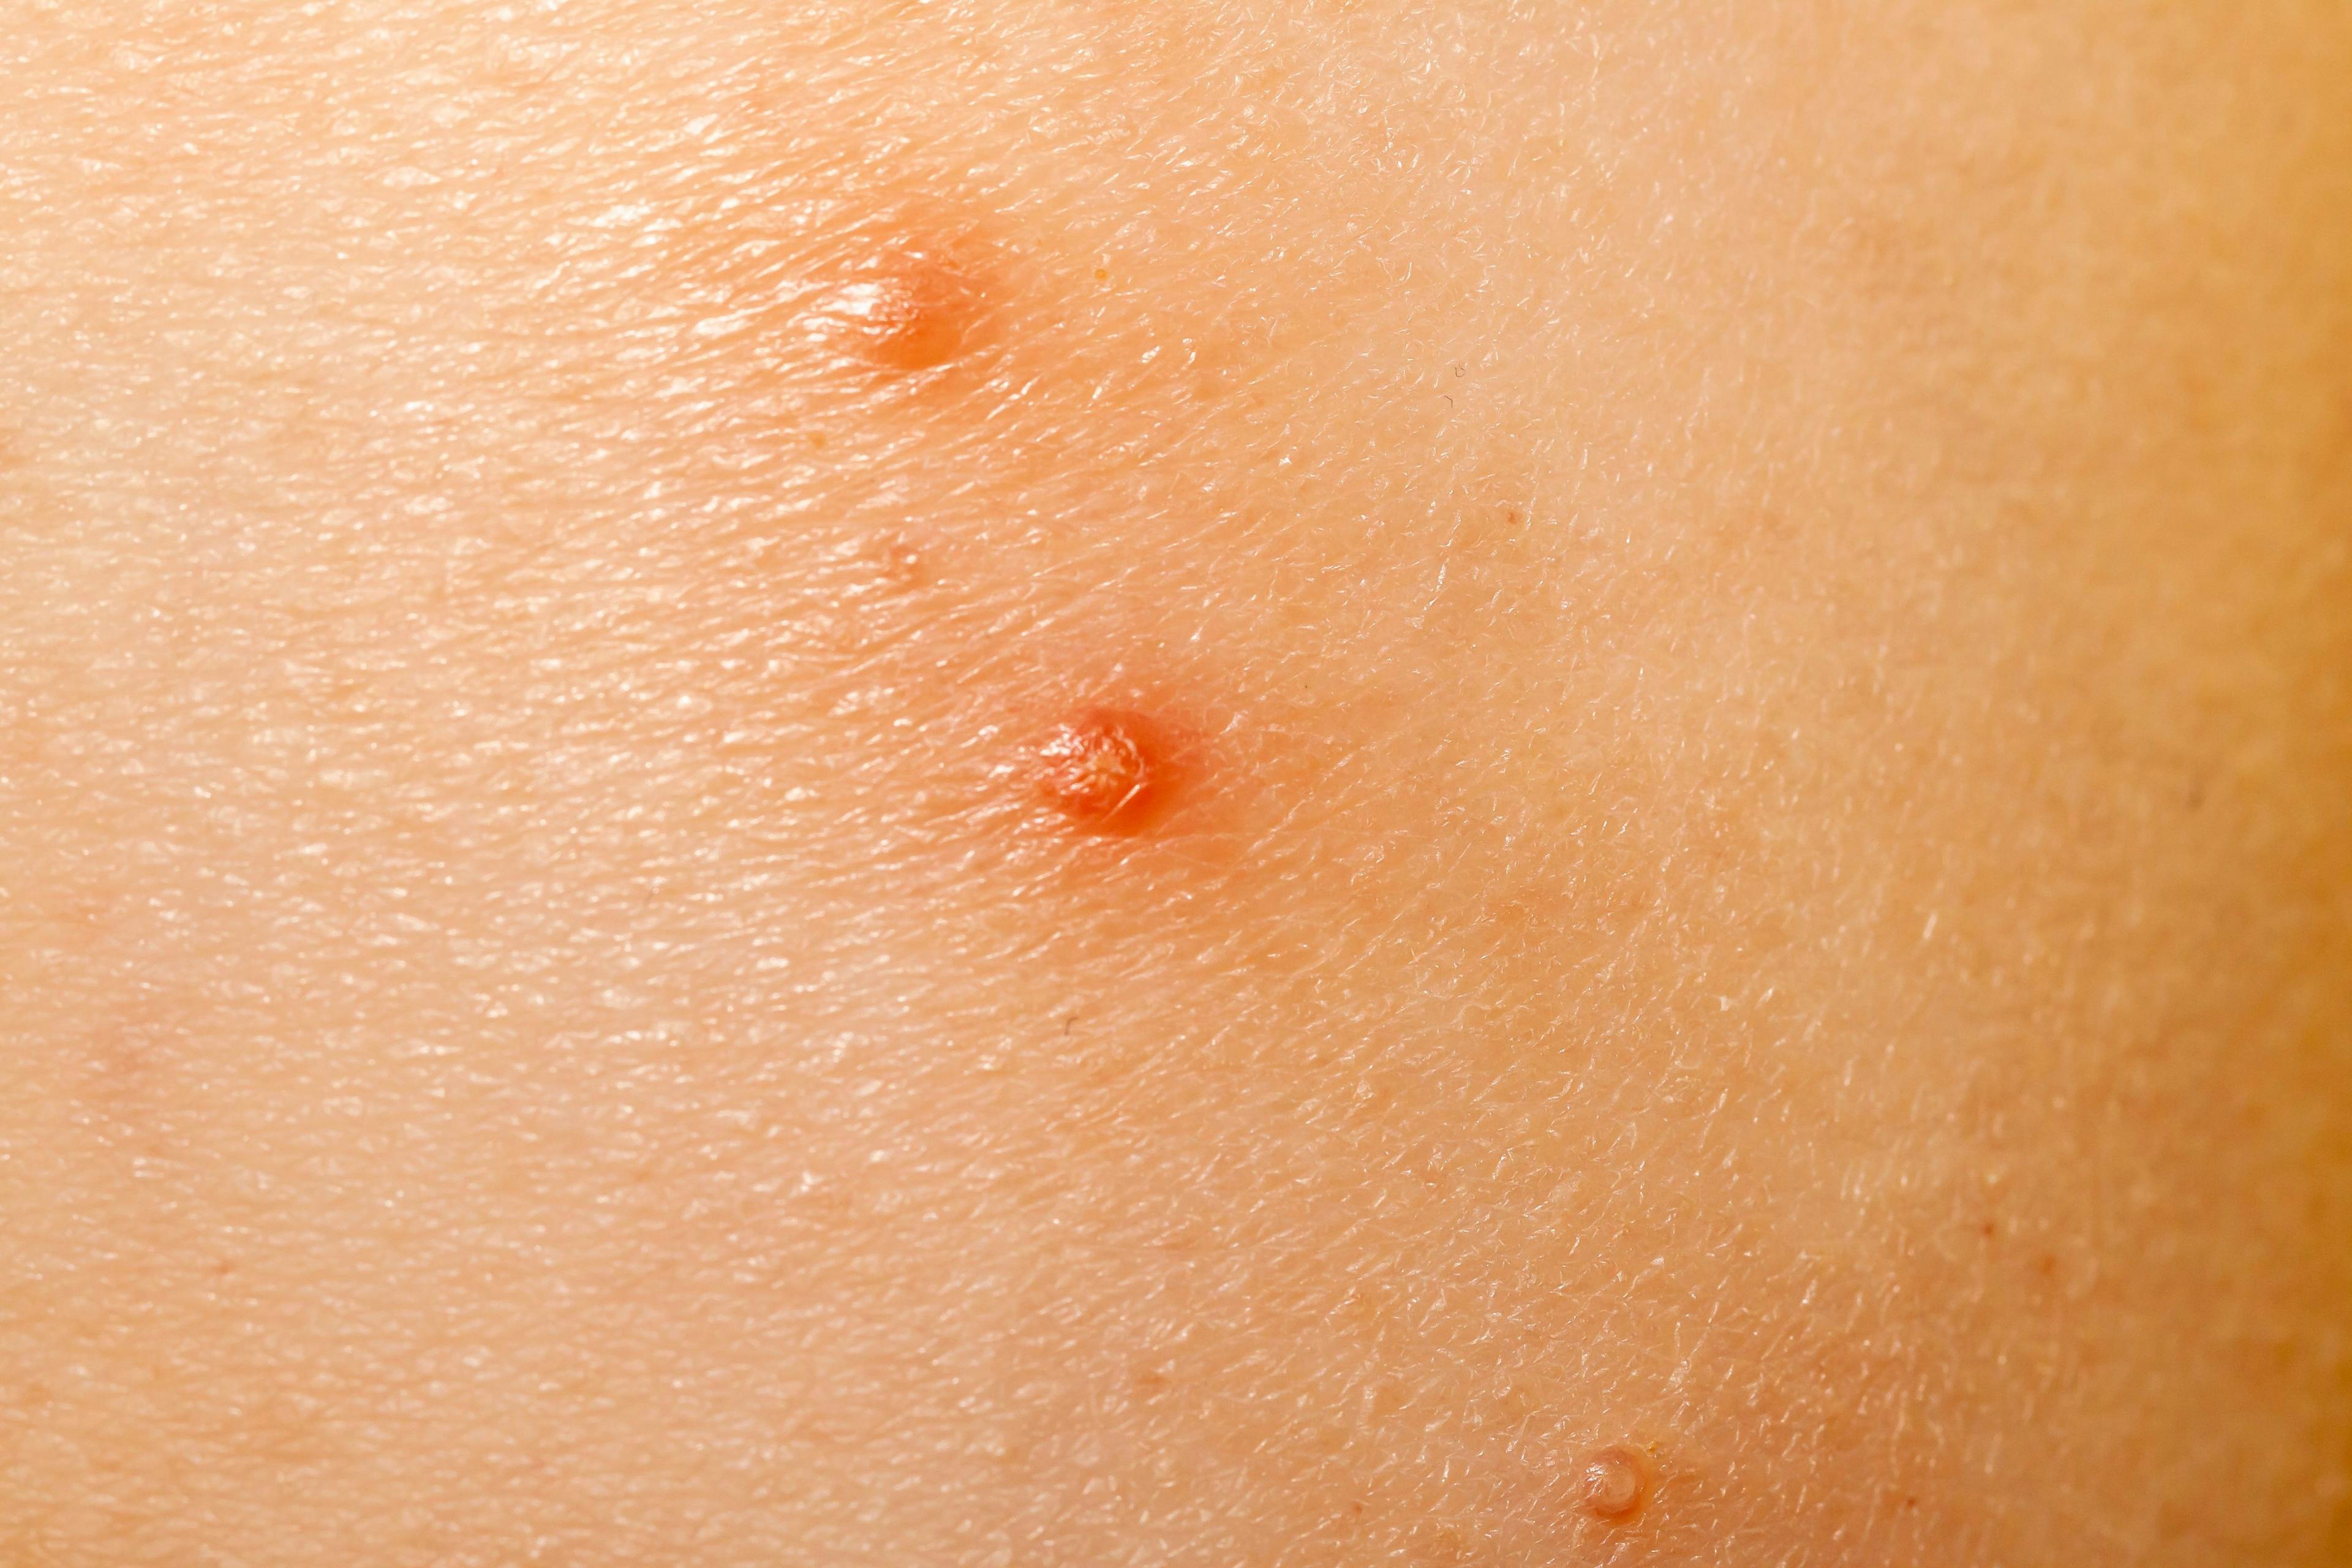 Berdamizer Gel Safe, Well-Tolerated in Patients With Molluscum Contagiosum